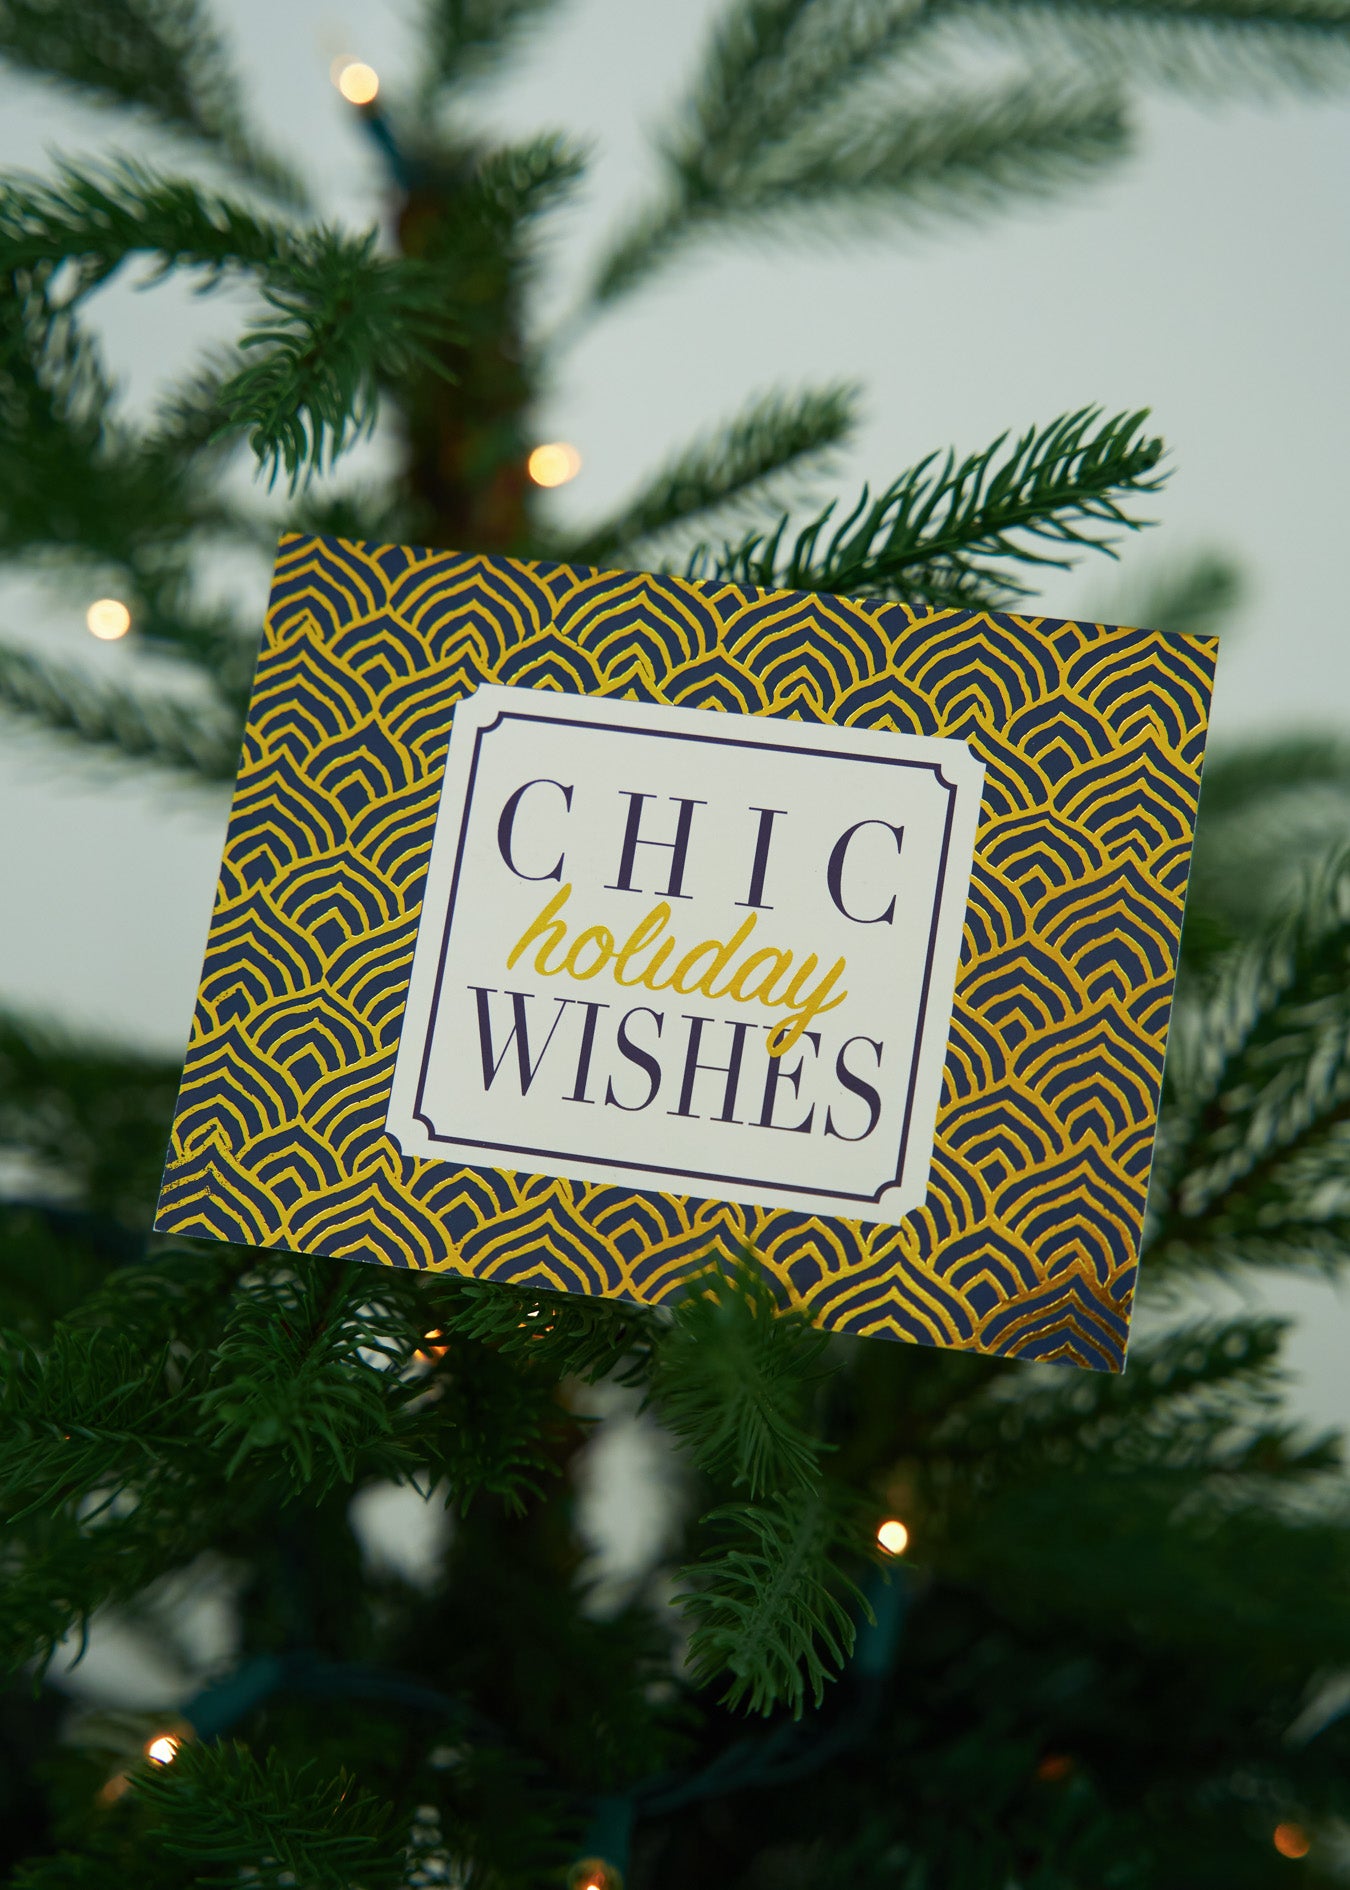 Chic Holiday Wishes Card on Christmas Tree